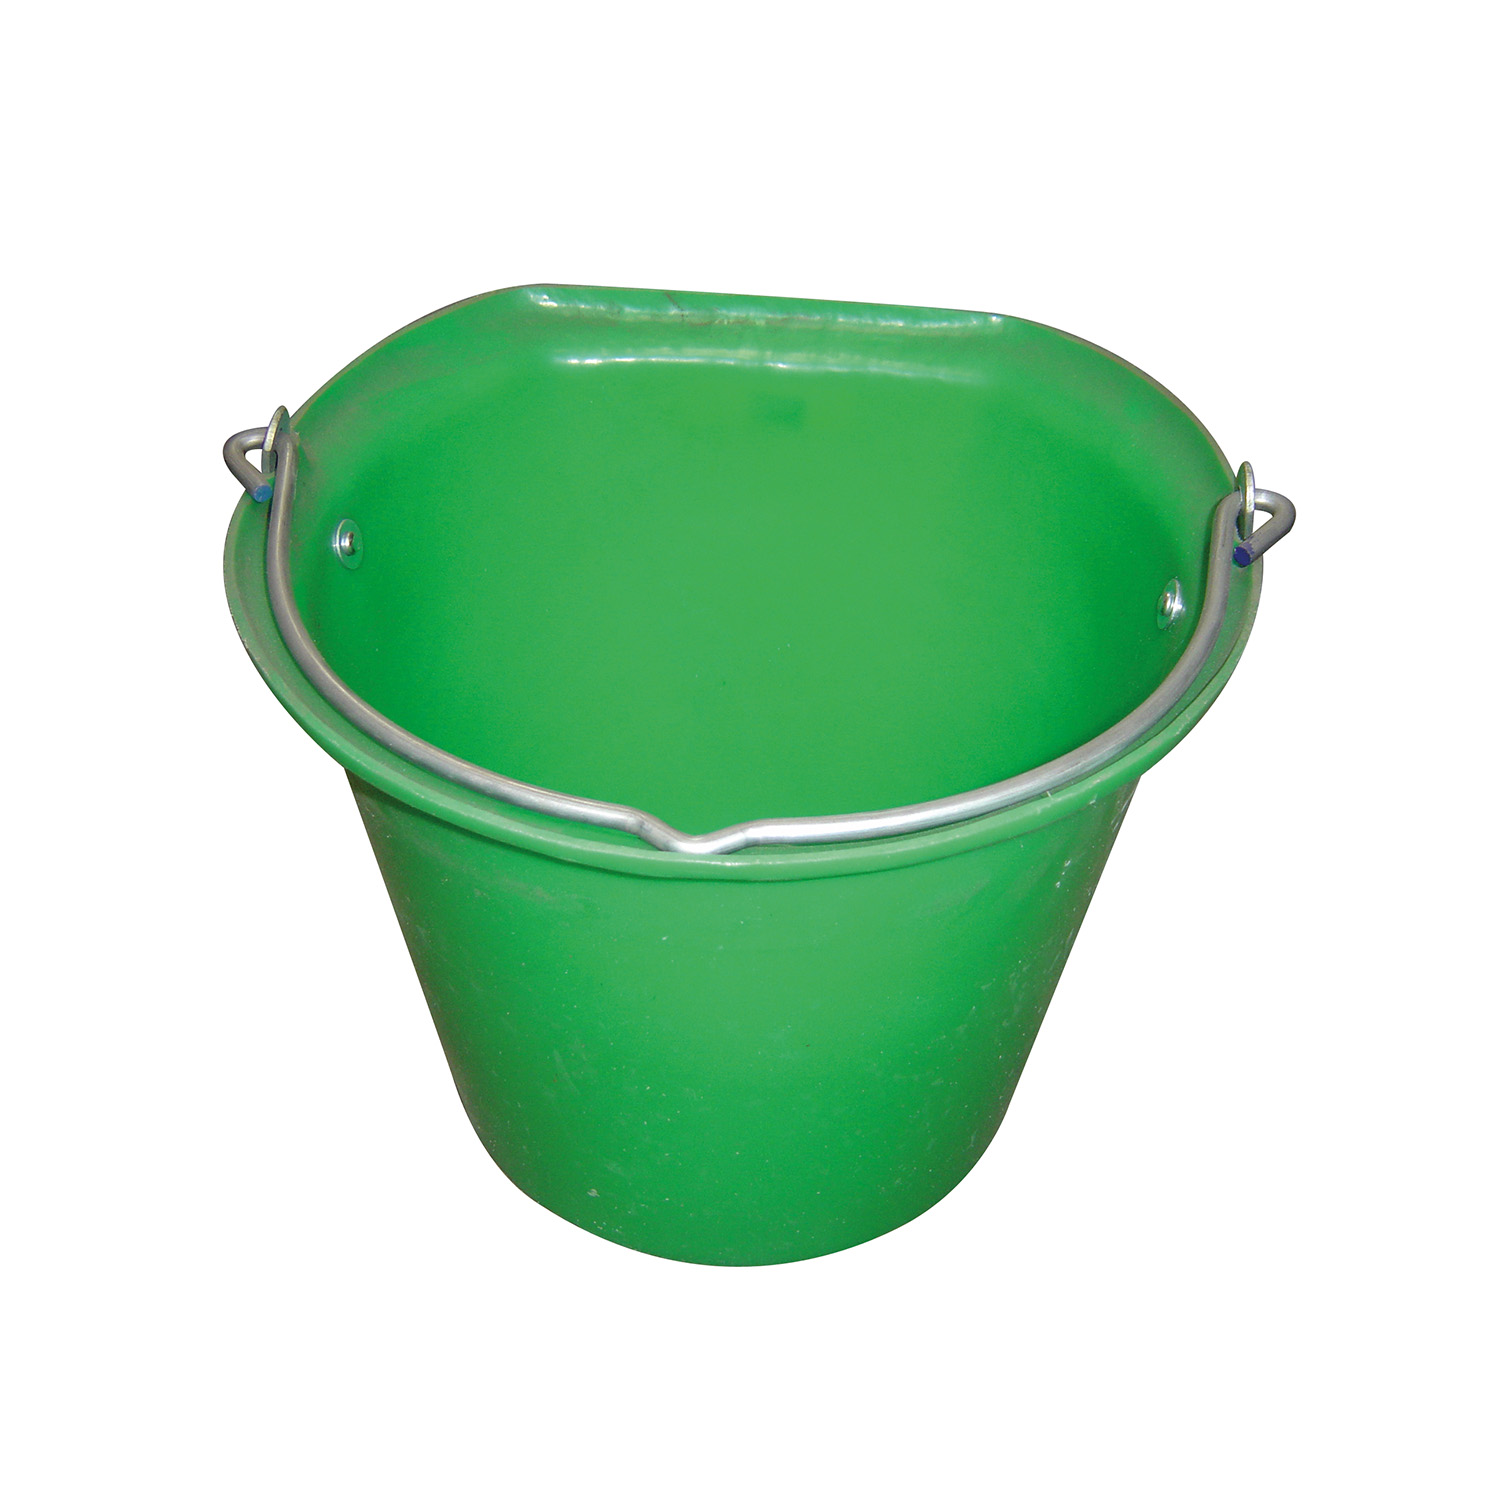 STUBBS HANGING BUCKET FLAT SIDED LARGE 18 LT S85A GREEN 18 LT